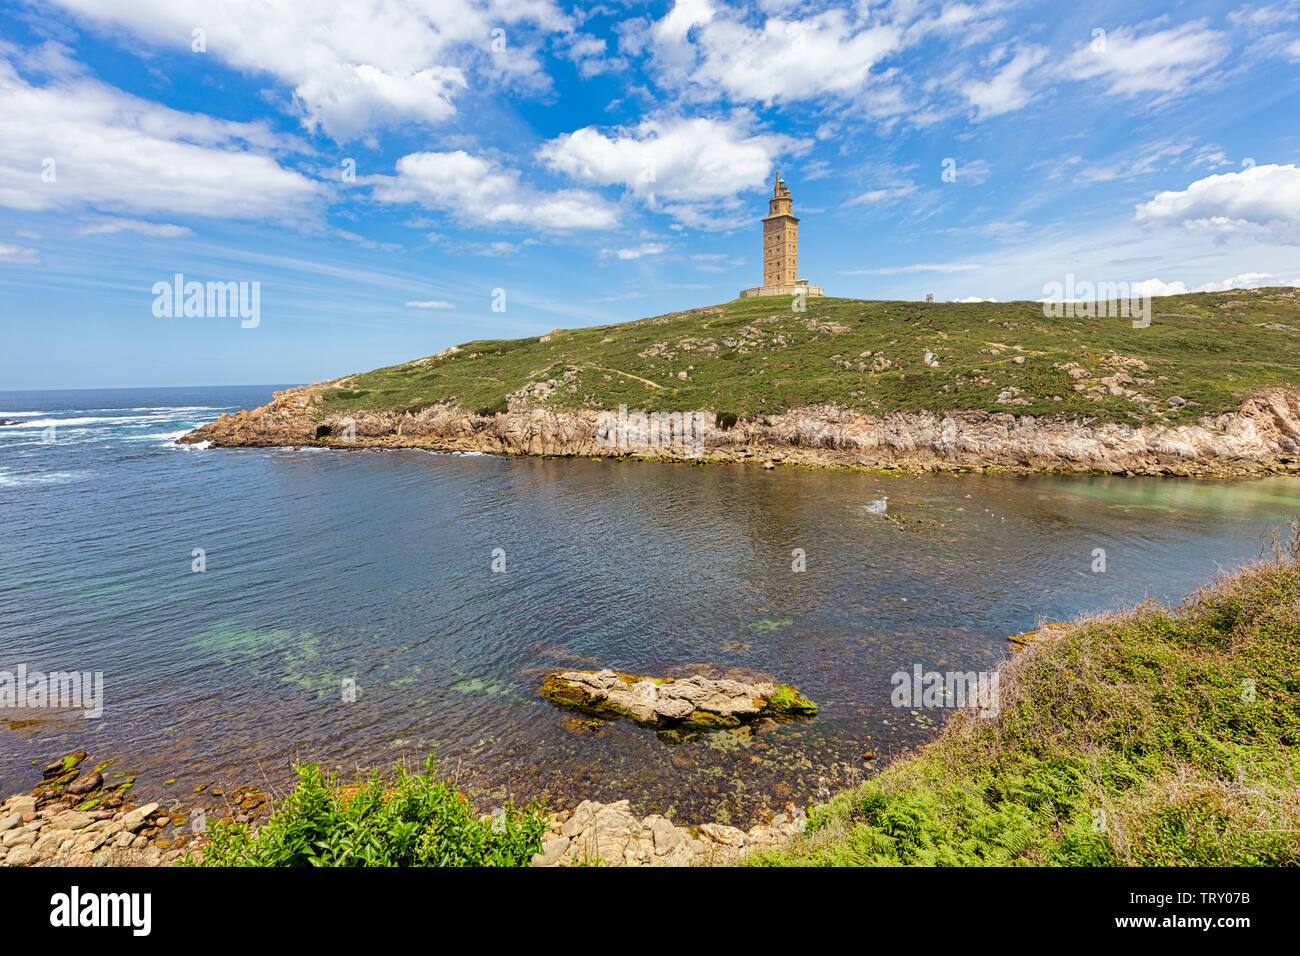 Tower of Hercules, A Coruna, A Coruna Province, Galicia, Spain.  The Tower of Hercules, a UNESCO World Heritage Site, was originally built by the Roma Stock Photo